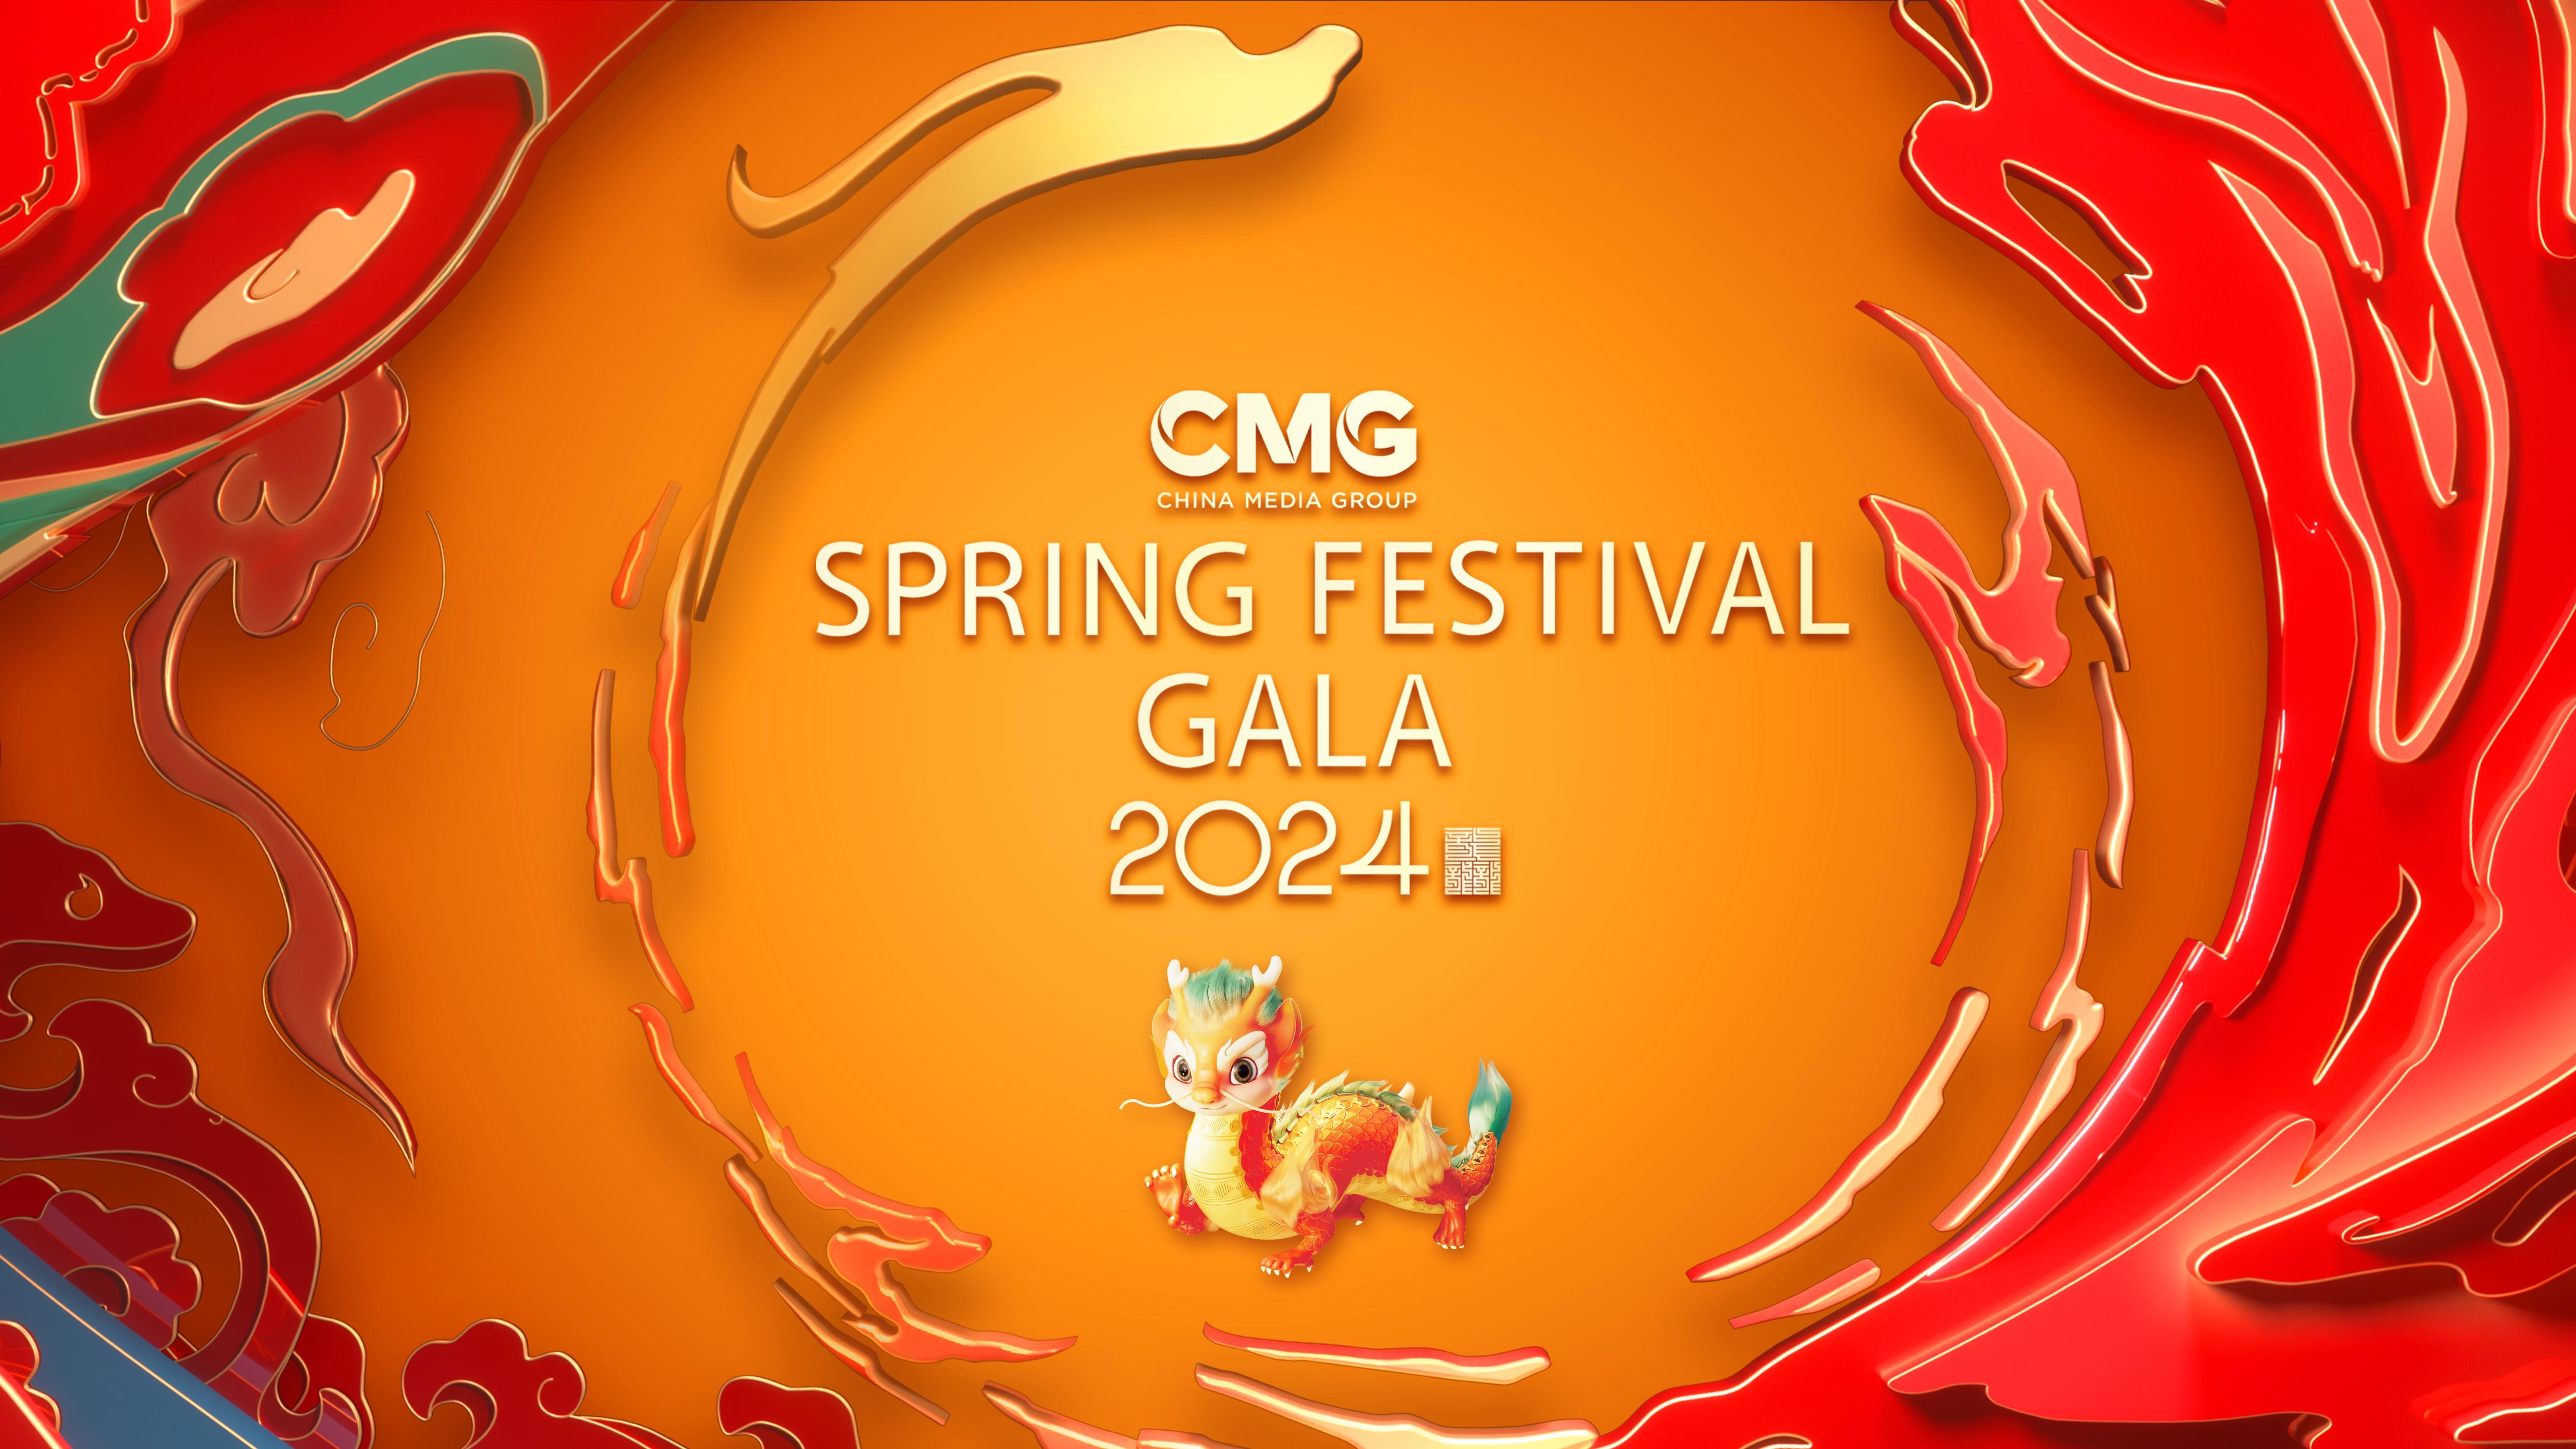 Over 2,100 media to air China Media Group's Spring Festival Gala